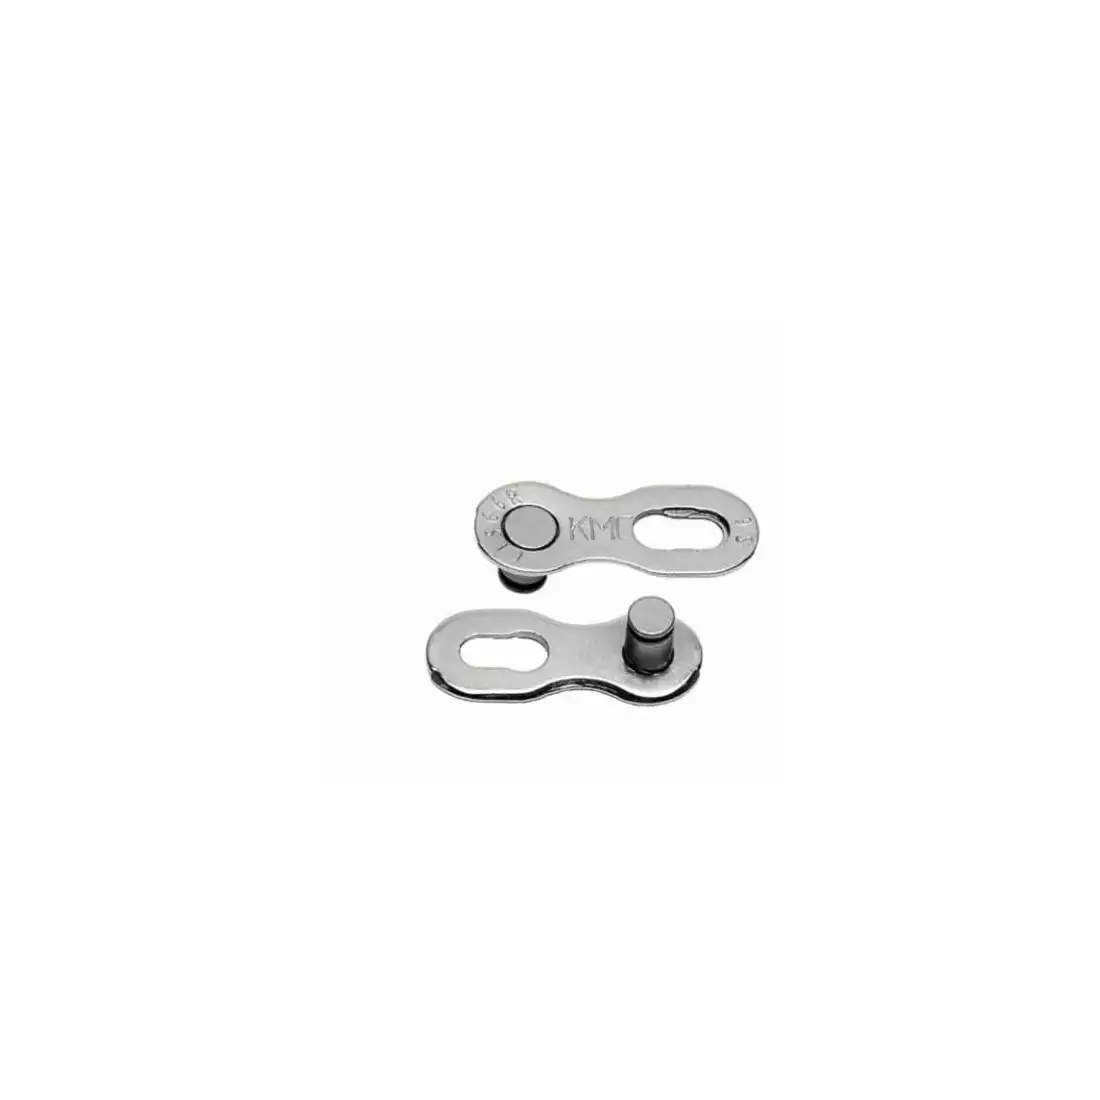 KMC CL-566R EPT Bicycle chain clip, 9-speed, 2 pieces, silver